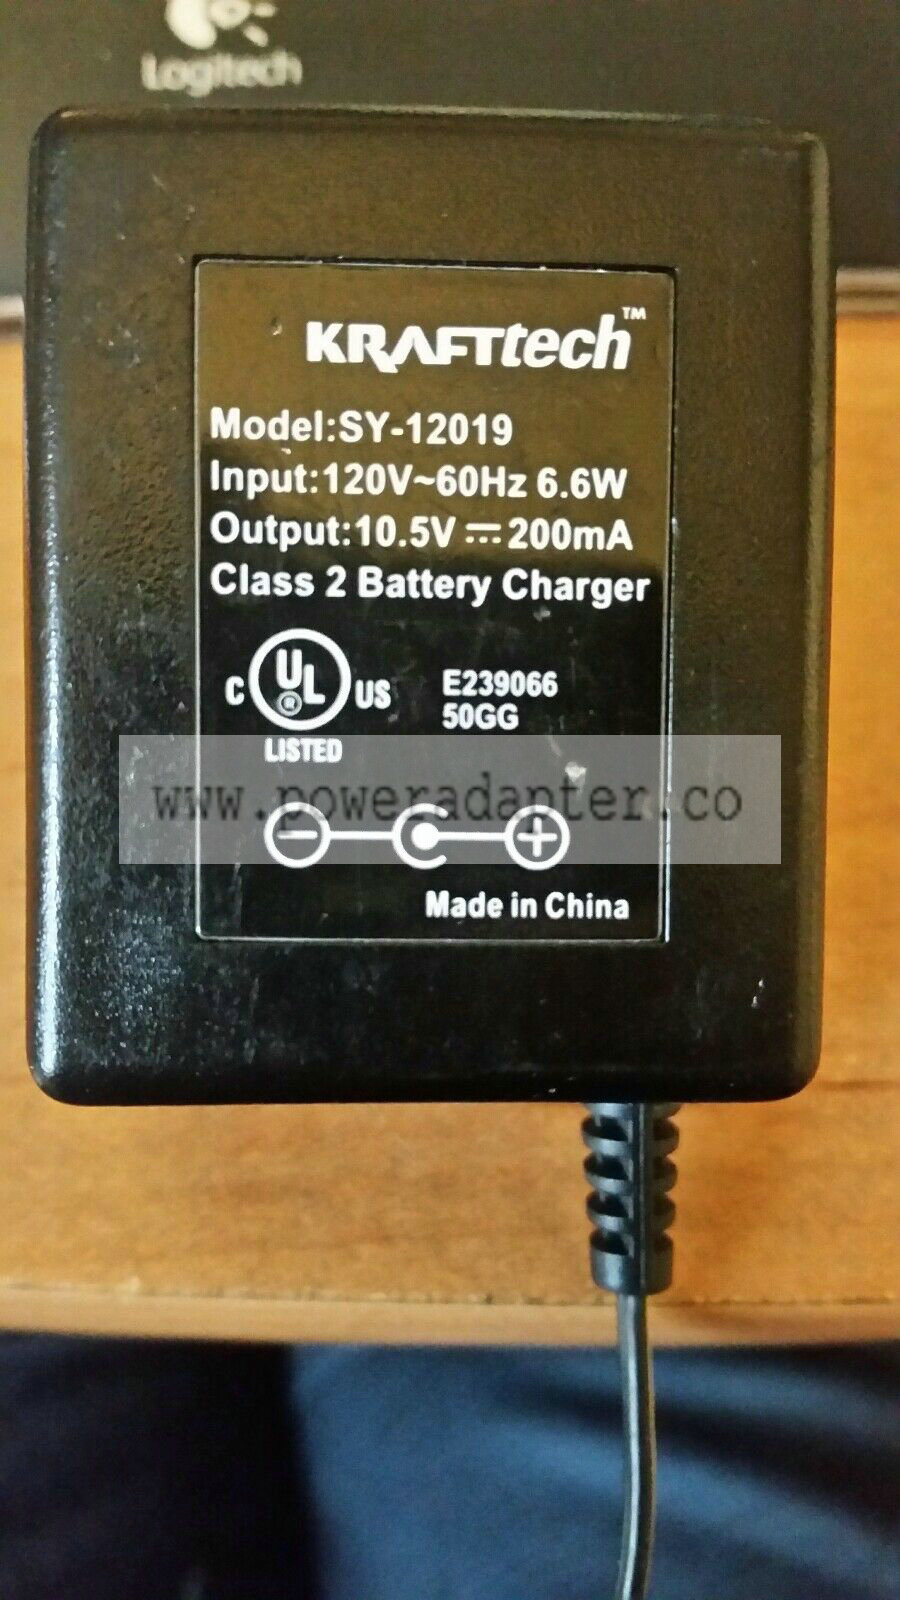 Genuine Kraftech (SY-12019) 10.5V 200mA Class 2 Battery Charger Power Supply Model: SY-12019 MPN: SY-12019 Modifi - Click Image to Close